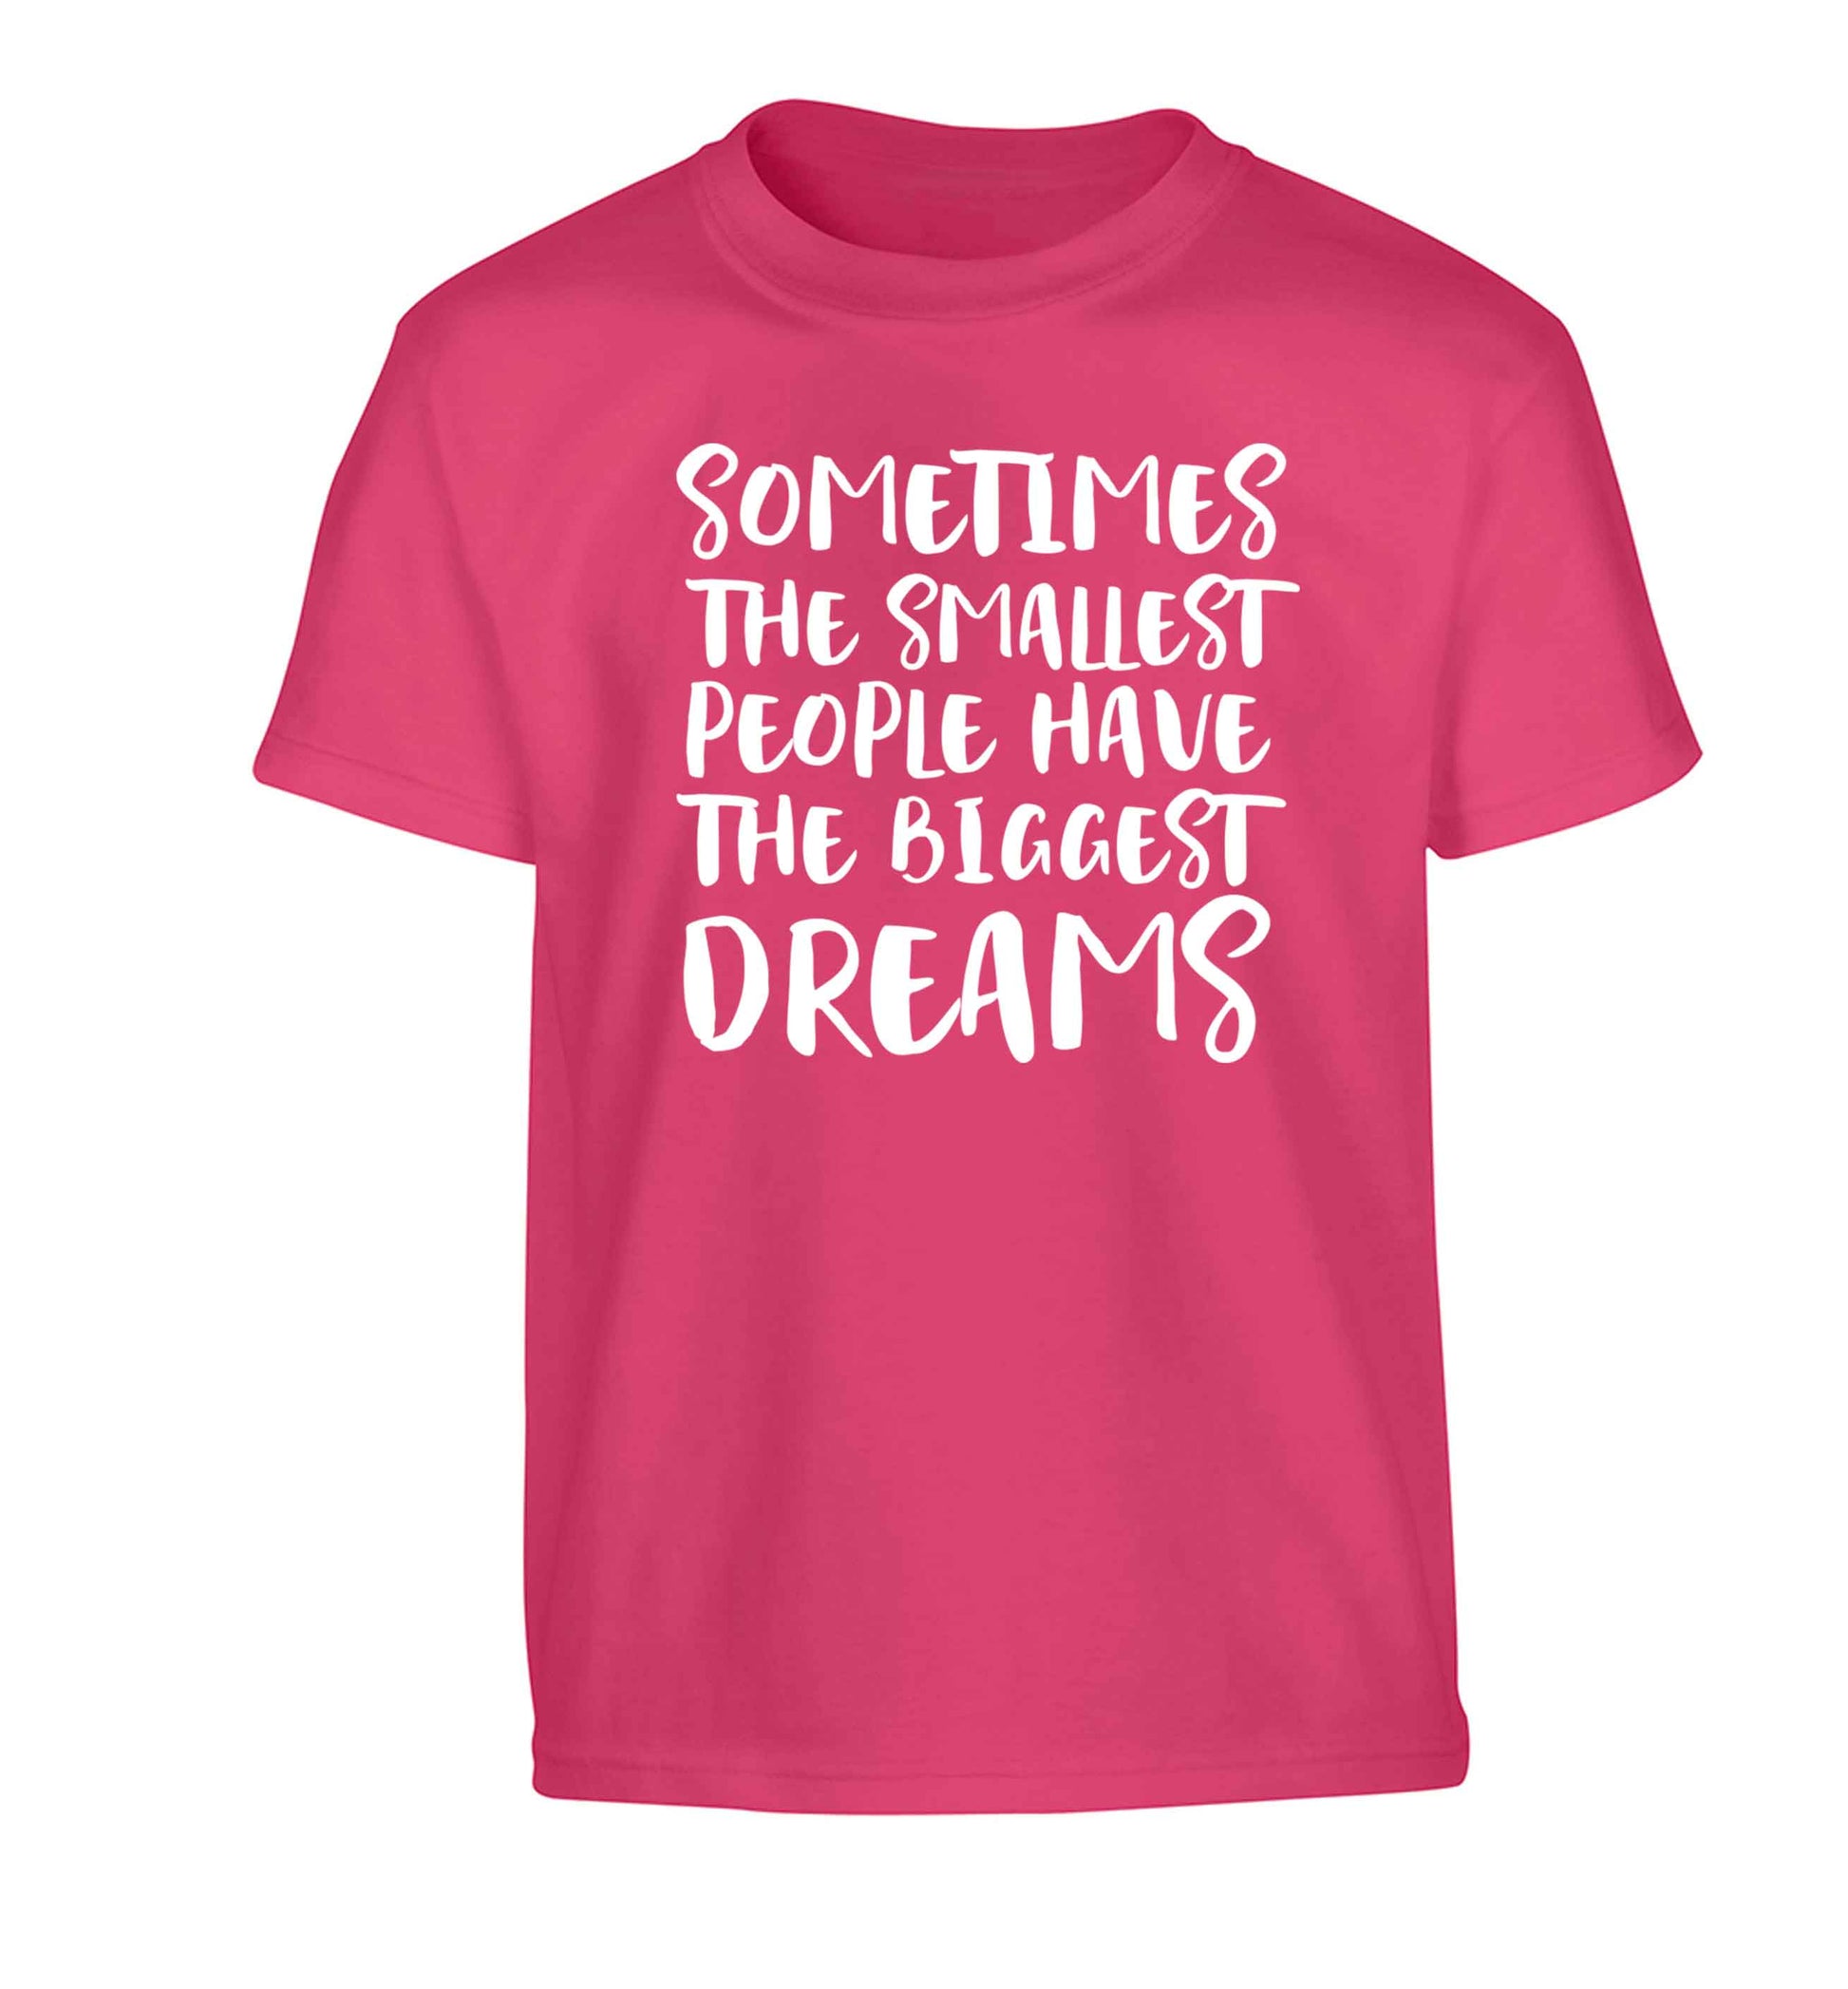 Sometimes the smallest people have the biggest dreams Children's pink Tshirt 12-13 Years